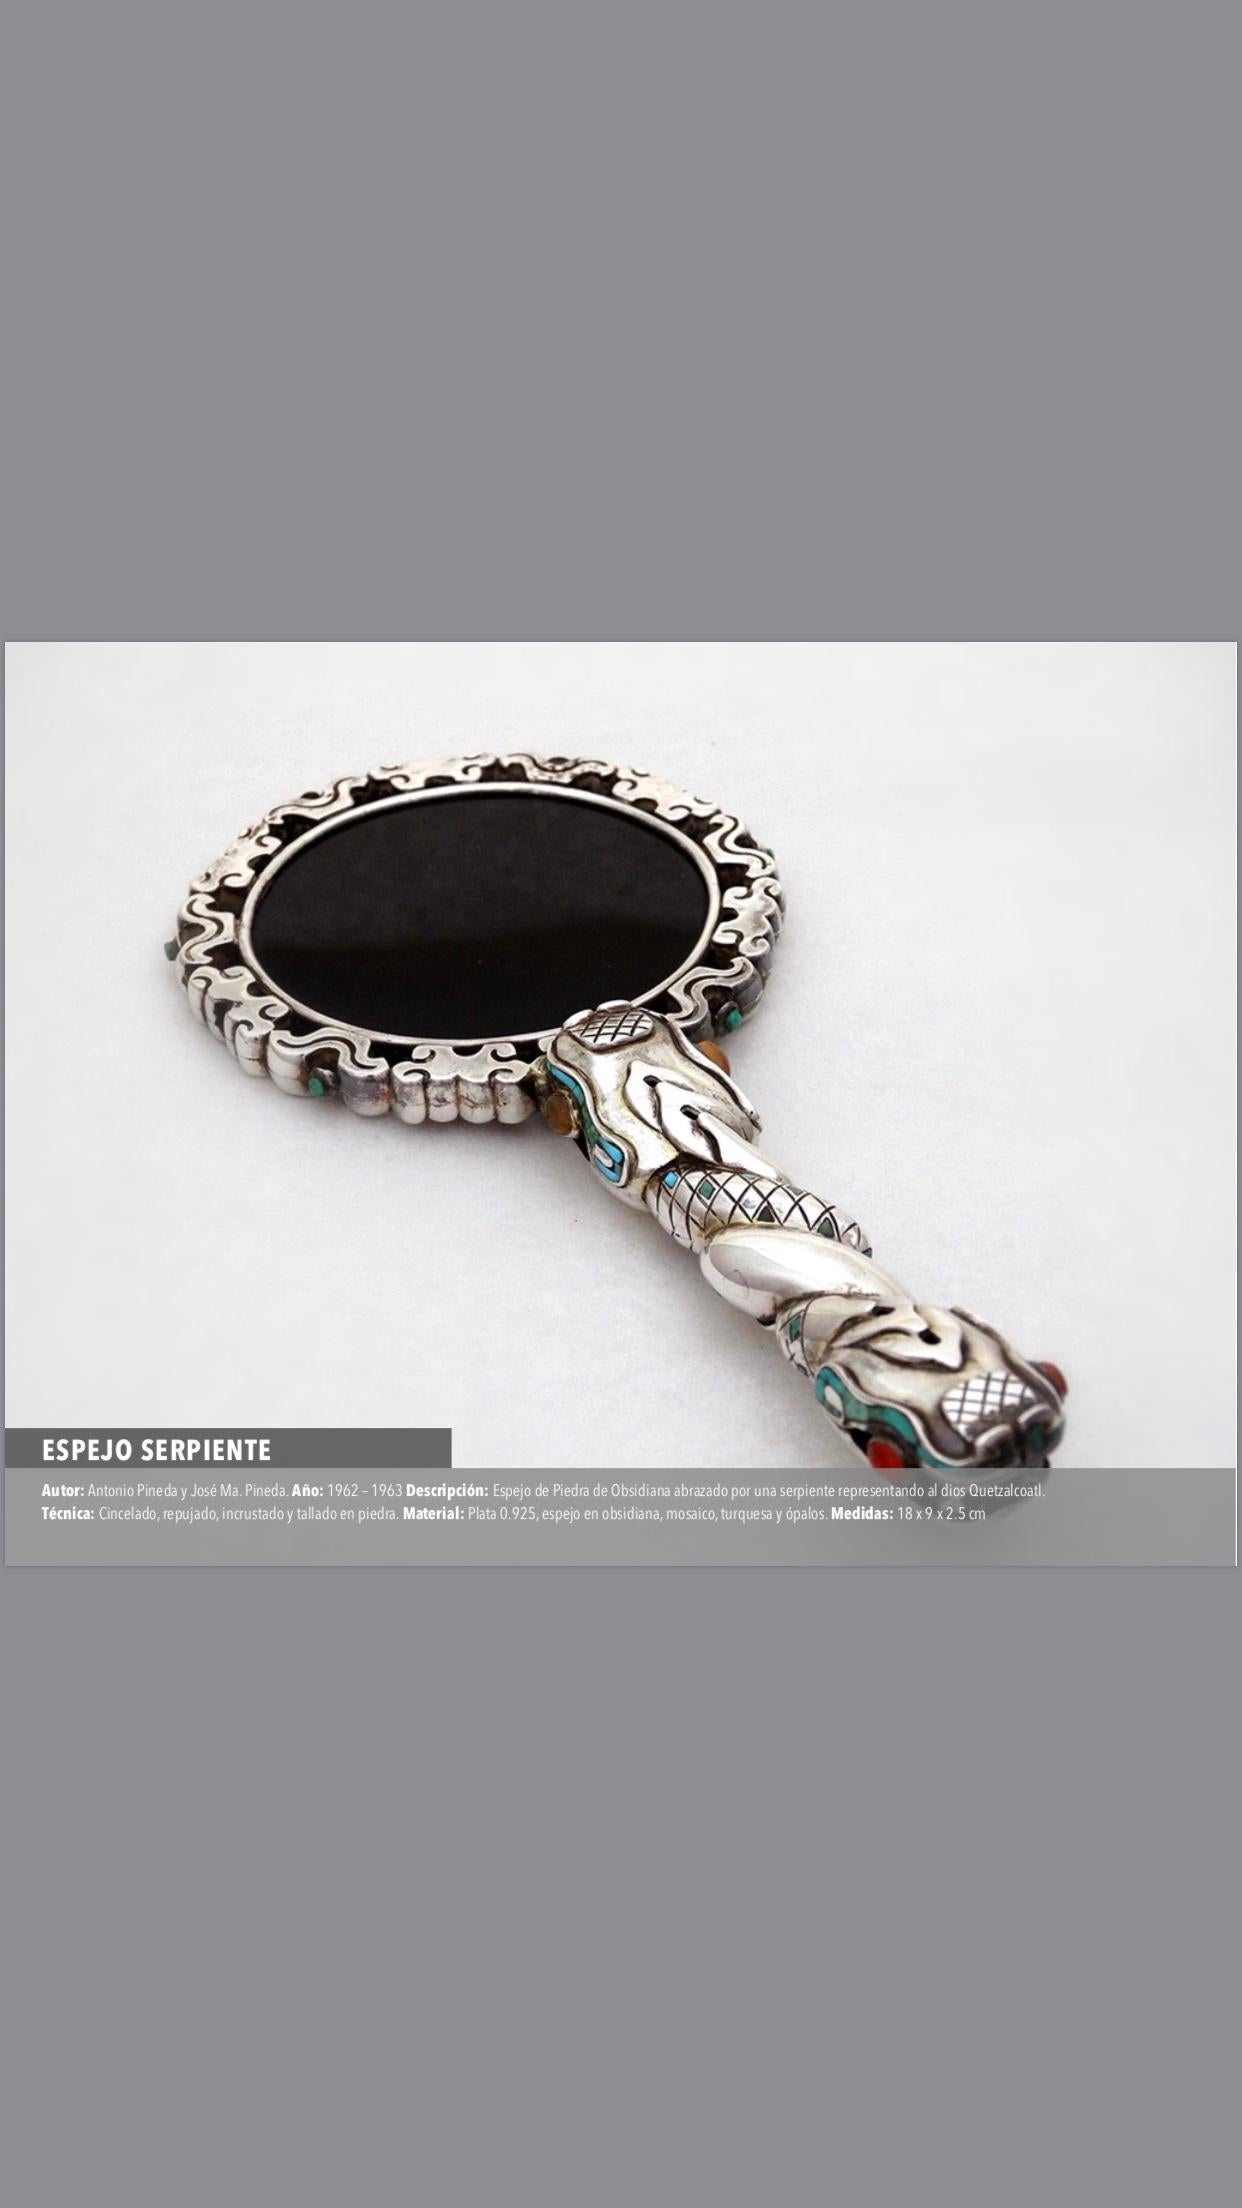 Obsidian and silver stone mirror, embraced by a serpent representing the Quetzalcoatl God. chiselled, embedded and carved stone